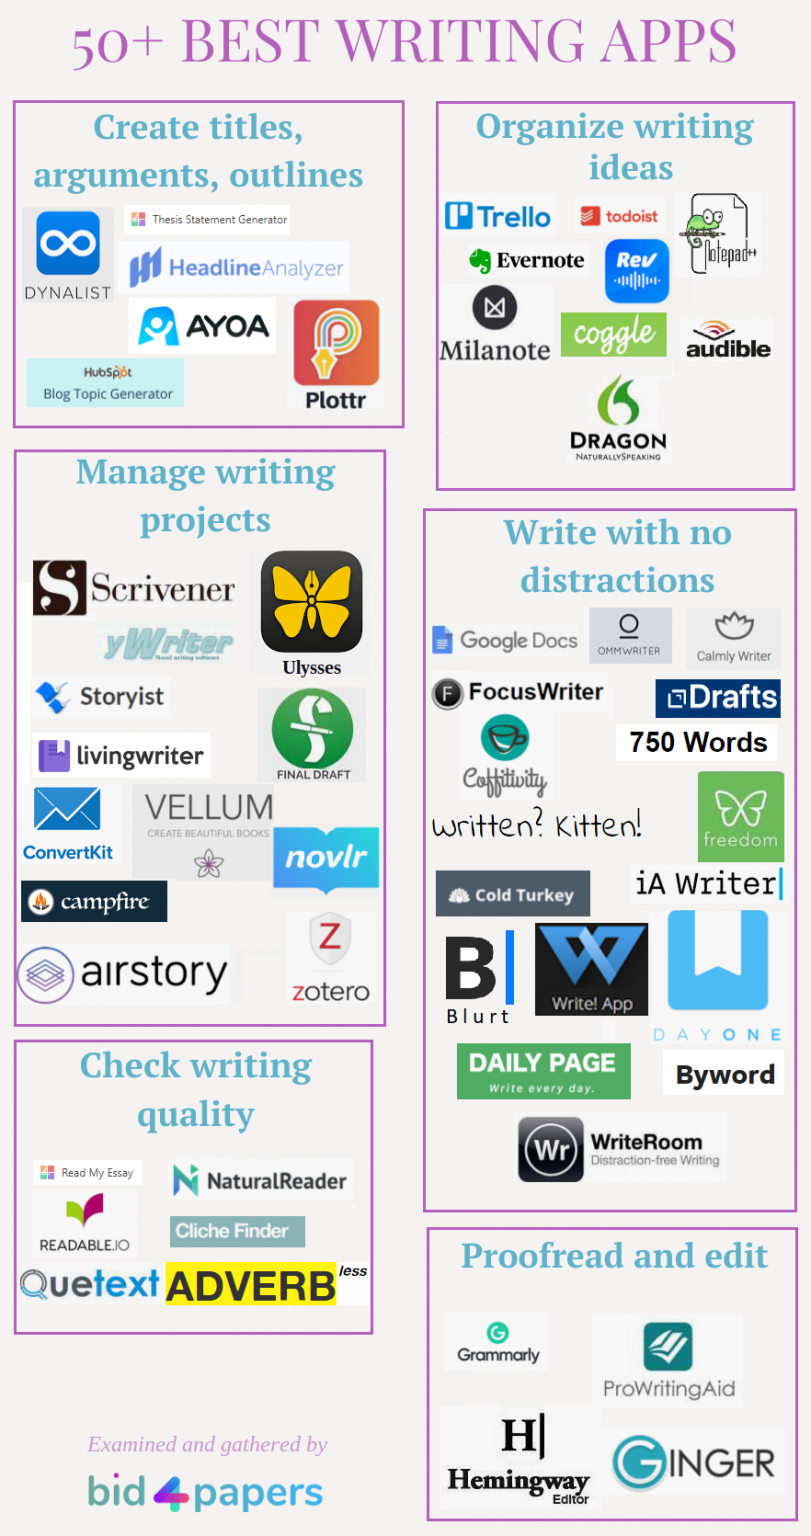 50+ Best Writing Apps to Help With Essays and Other Content